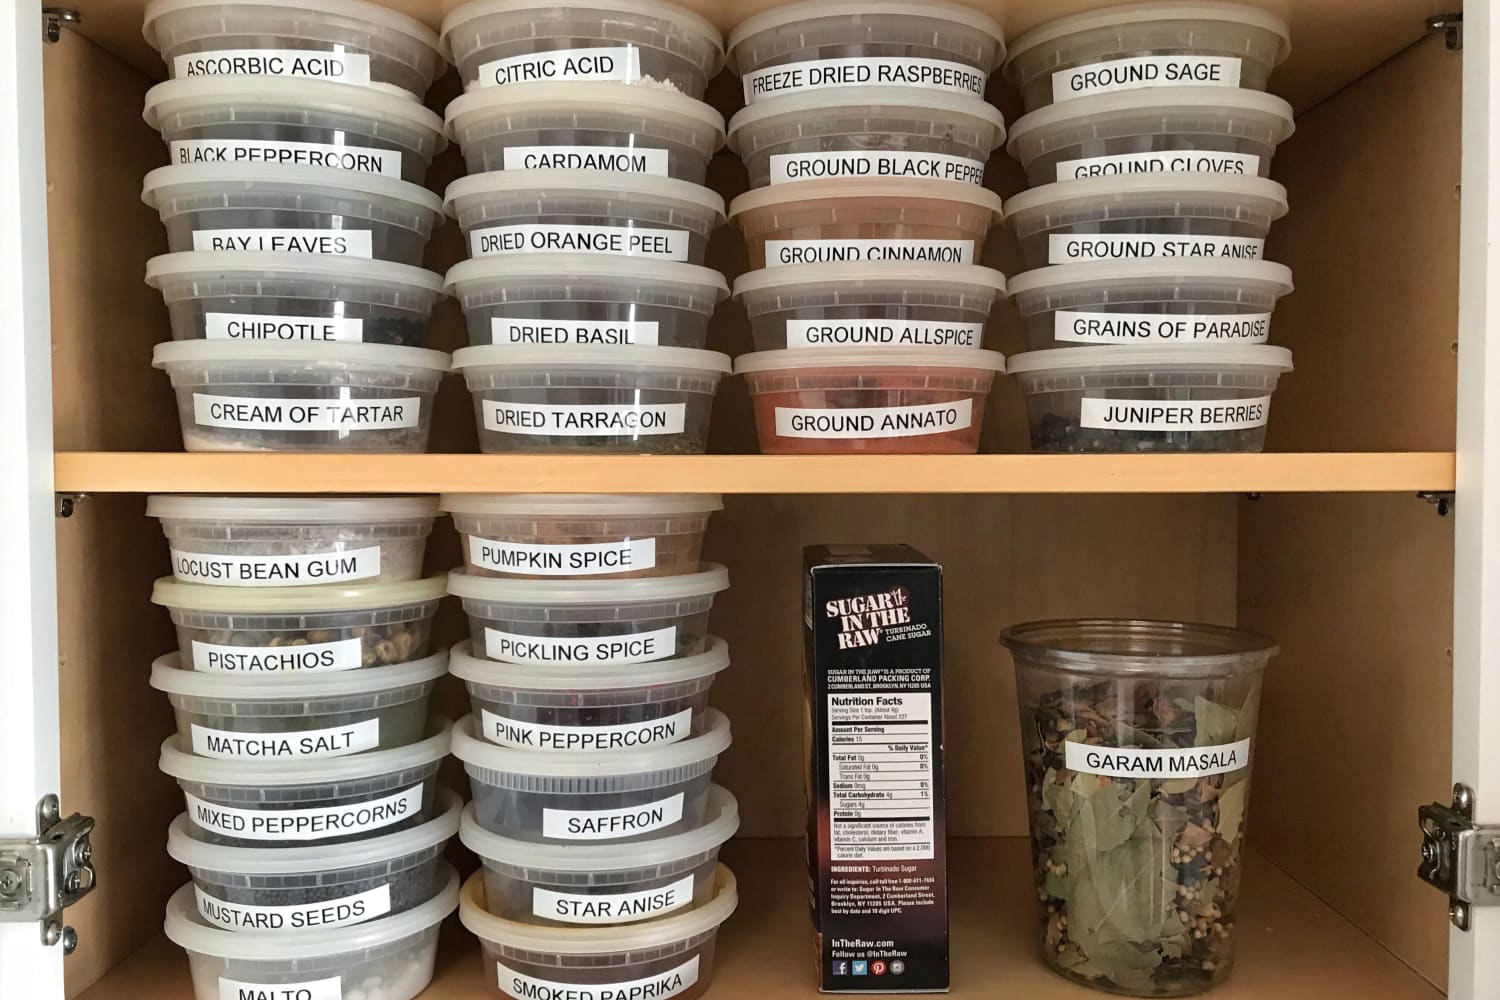 https://cdn.apartmenttherapy.info/image/upload/f_auto,q_auto:eco,c_fill,g_auto,w_1500,ar_3:2/k%2FEdit%2F2019-09-Spice-Organizing-Tip%2FJesse_s_spices